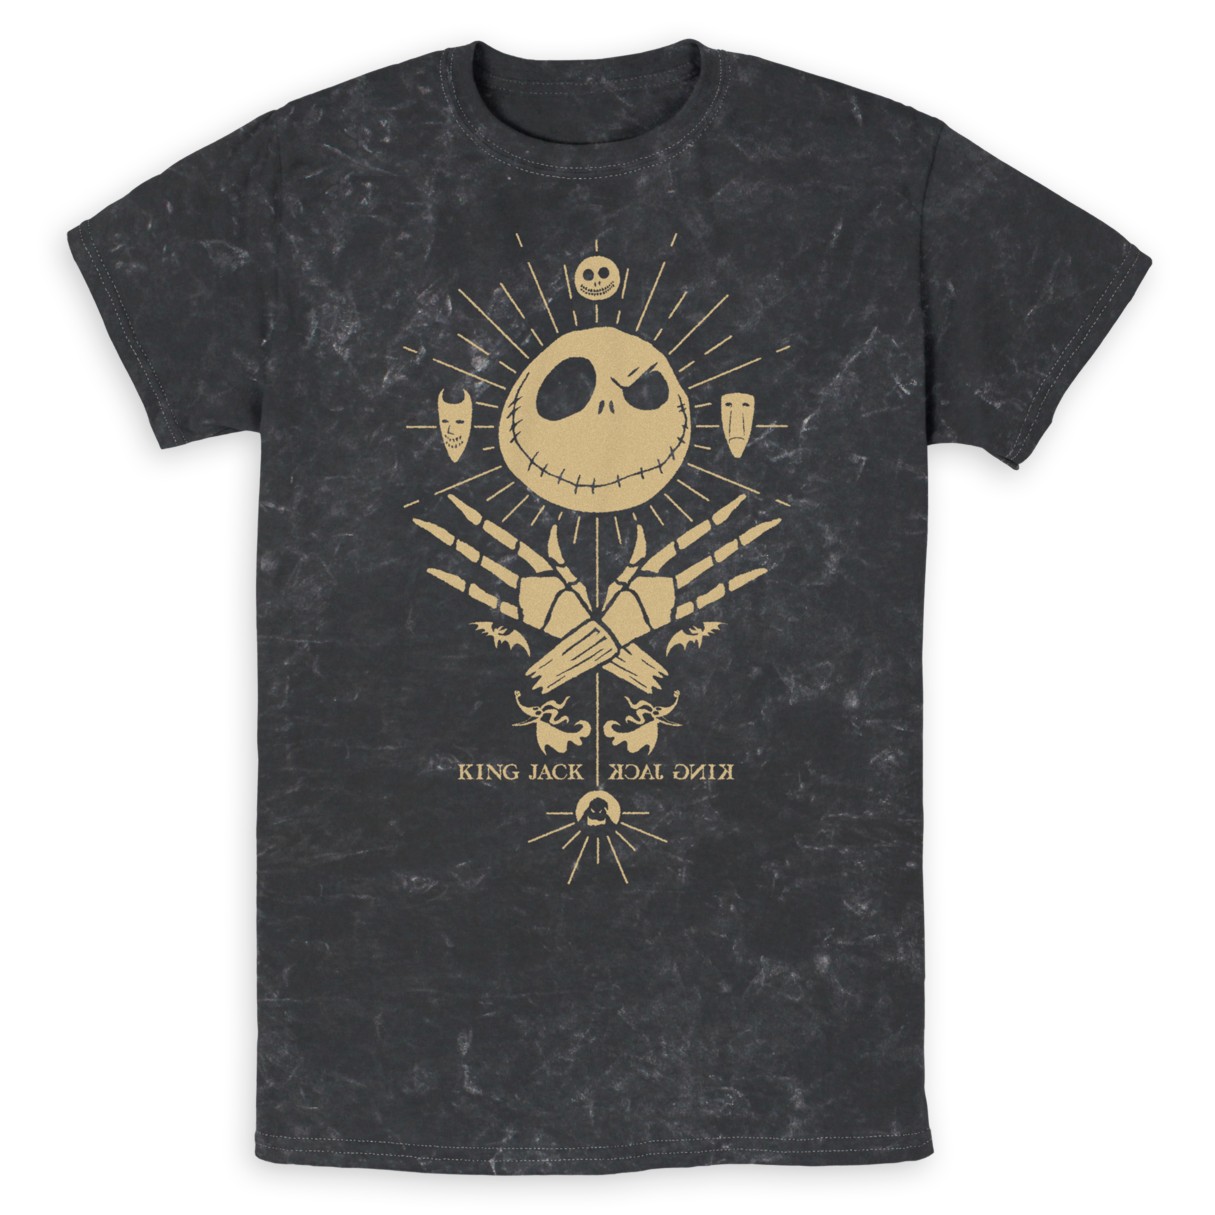 Jack Skellington and Friends Tie-Dye T-Shirt for Adults – The Nightmare Before Christmas